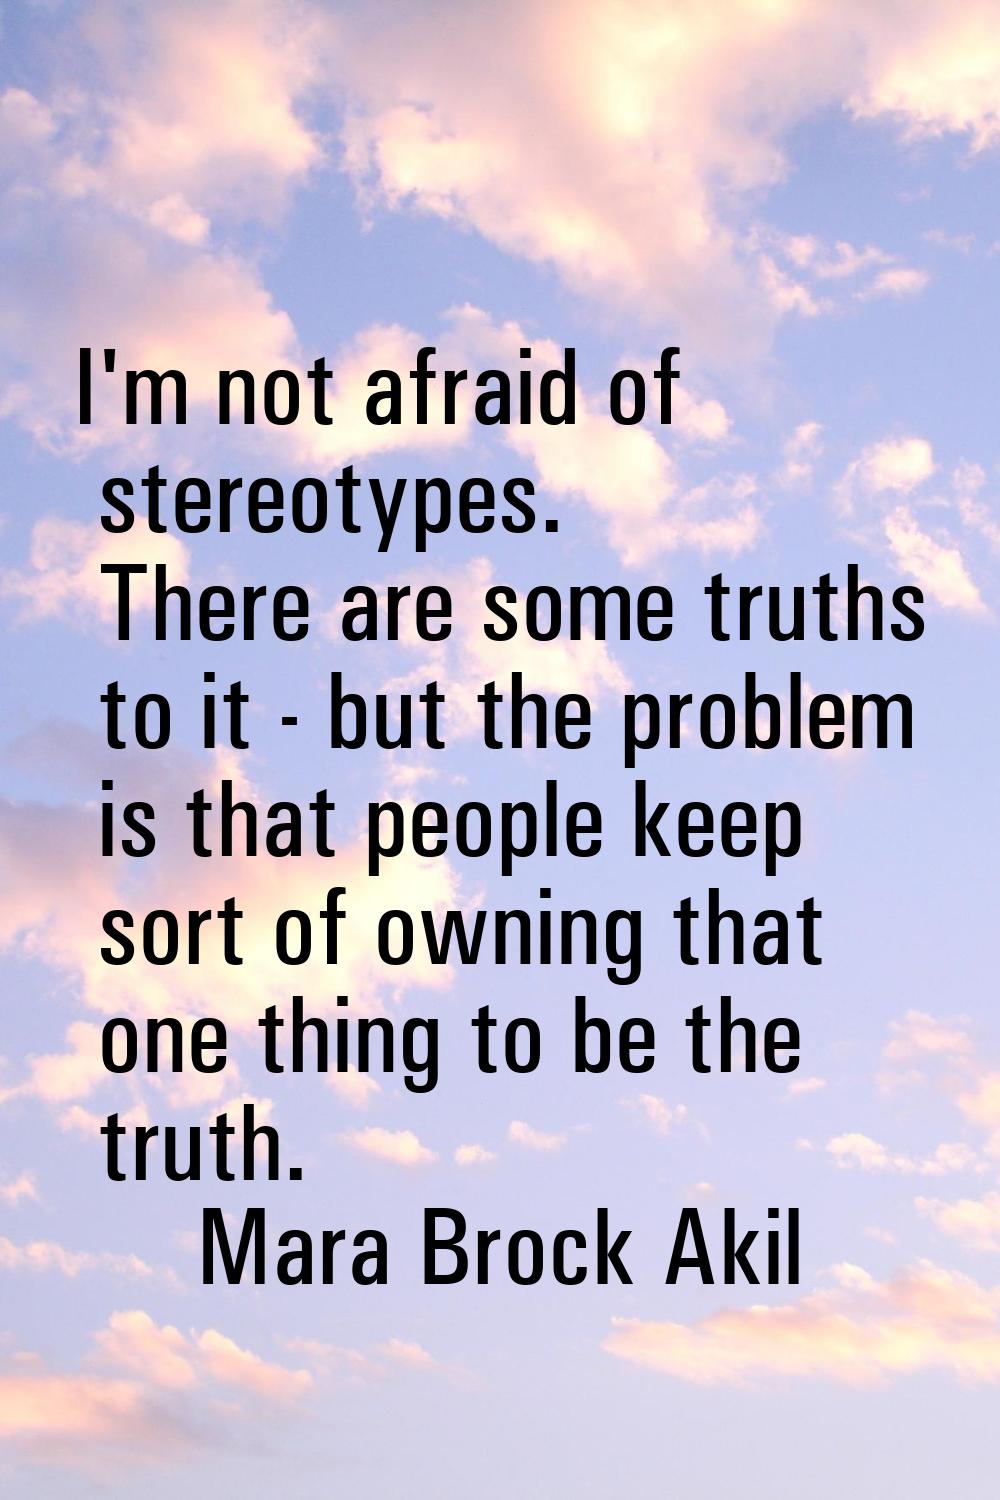 I'm not afraid of stereotypes. There are some truths to it - but the problem is that people keep so